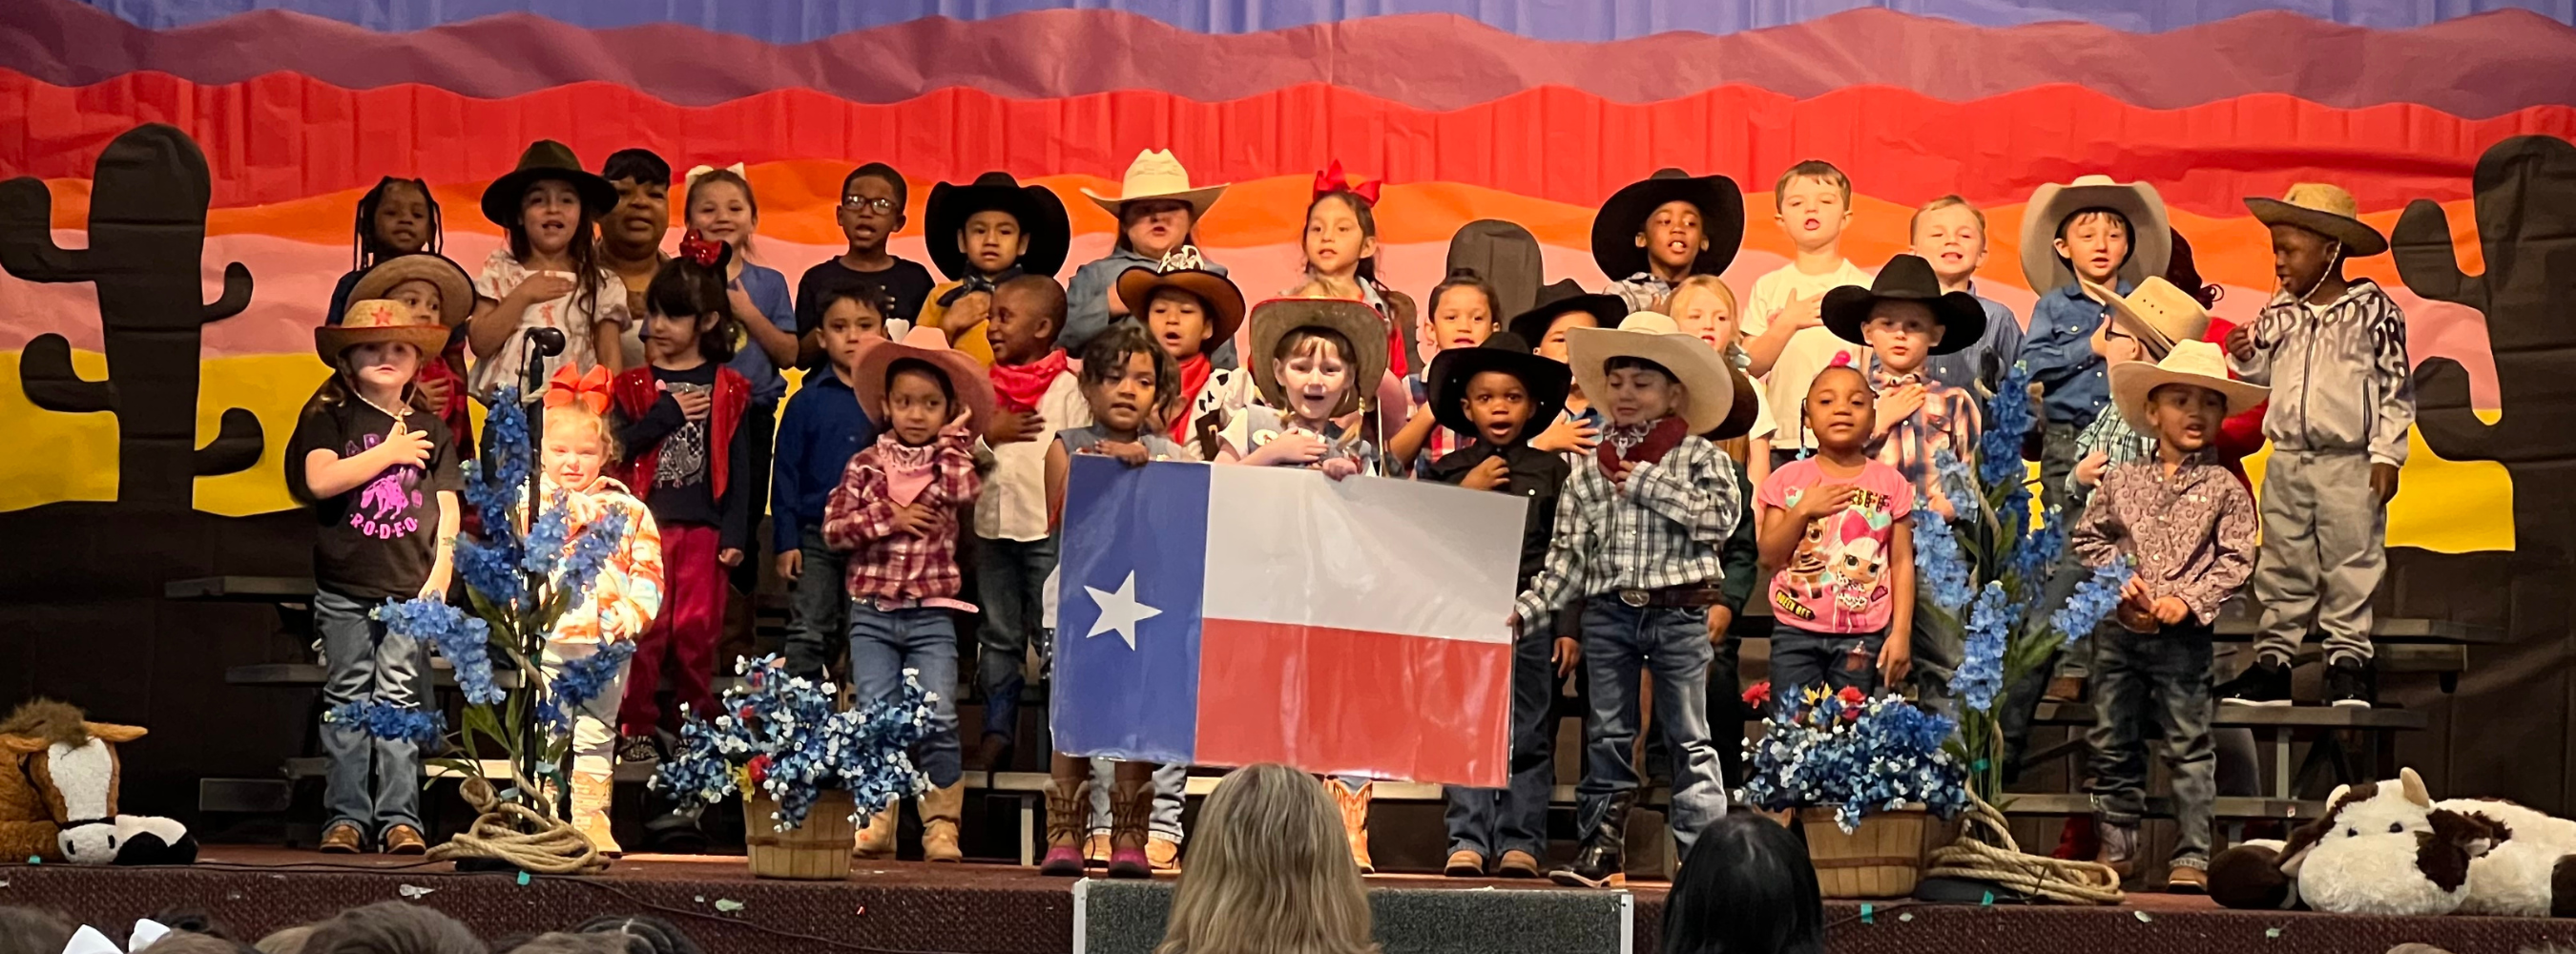 Pre-K Texas Play at Carthage Primary